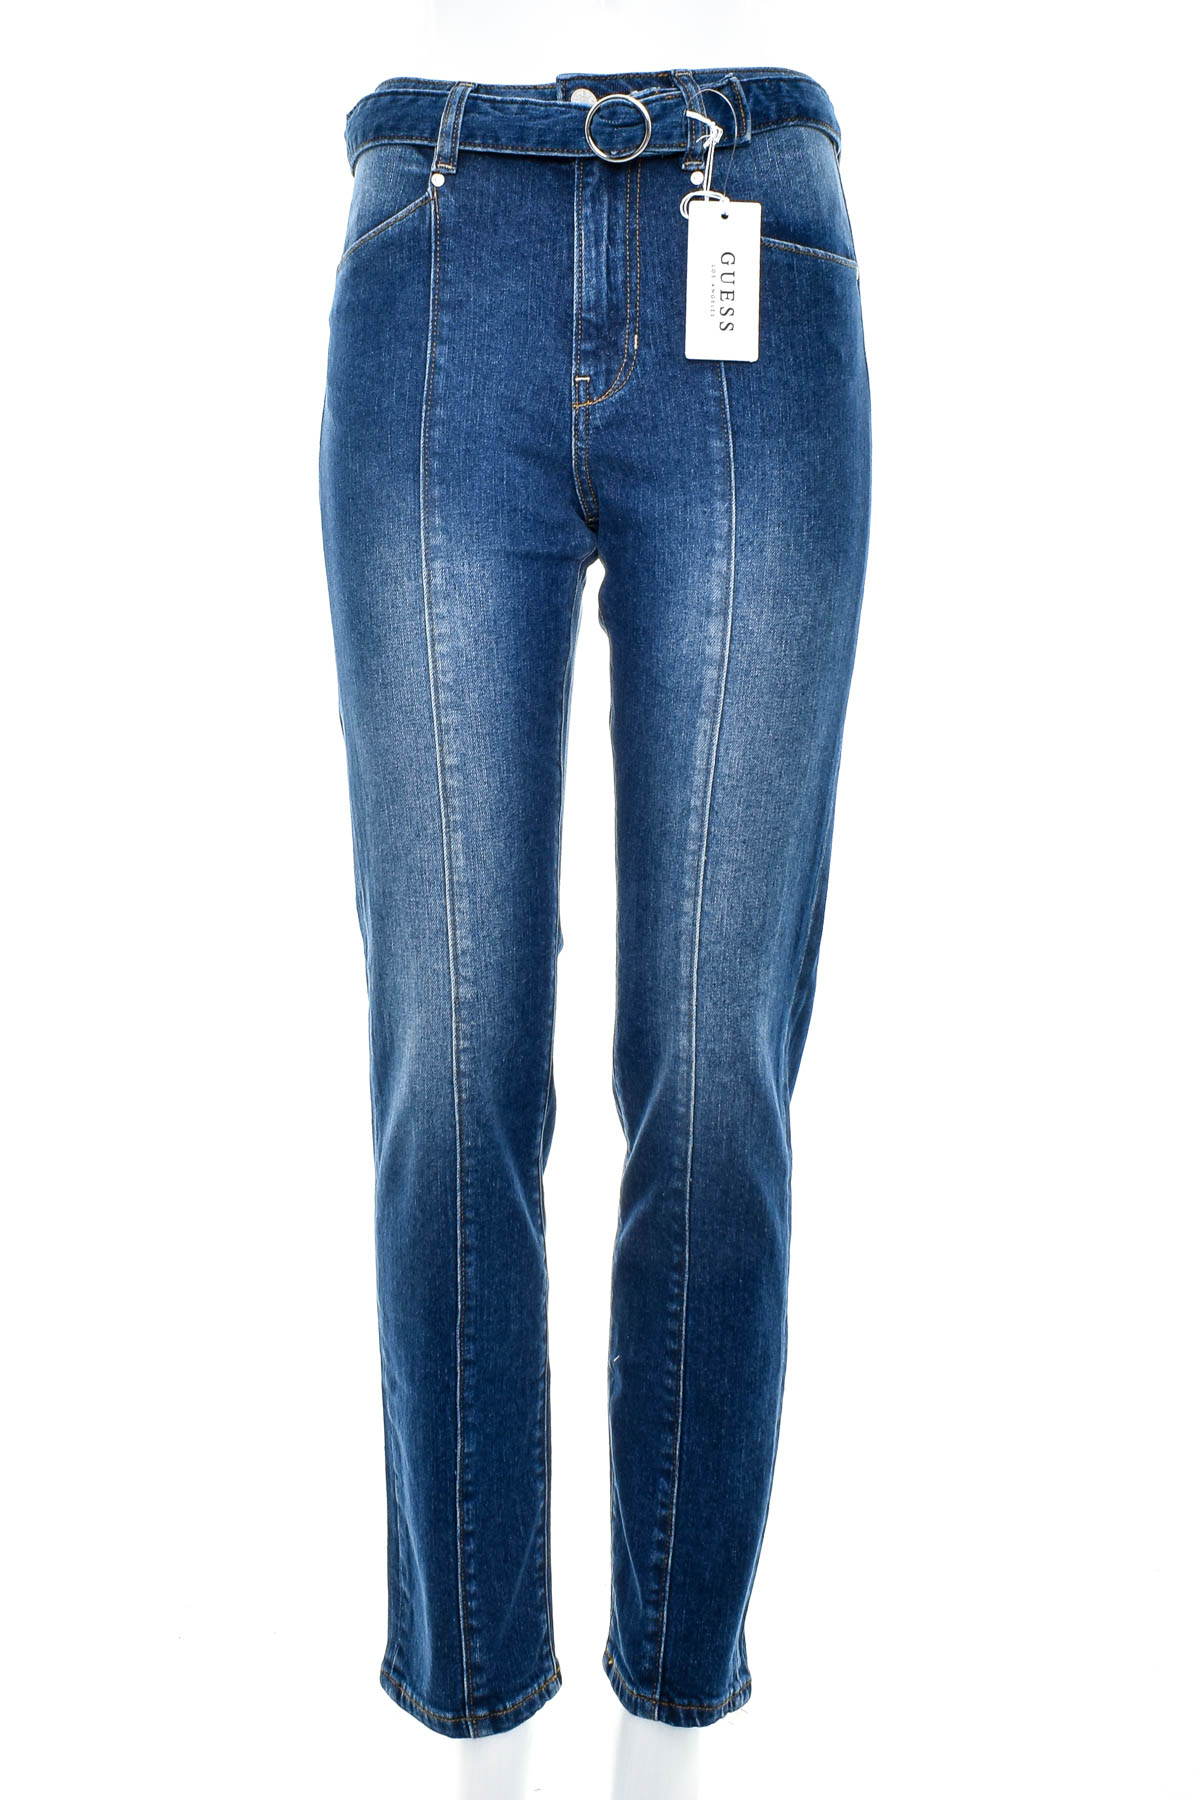 Women's jeans - GUESS - 0